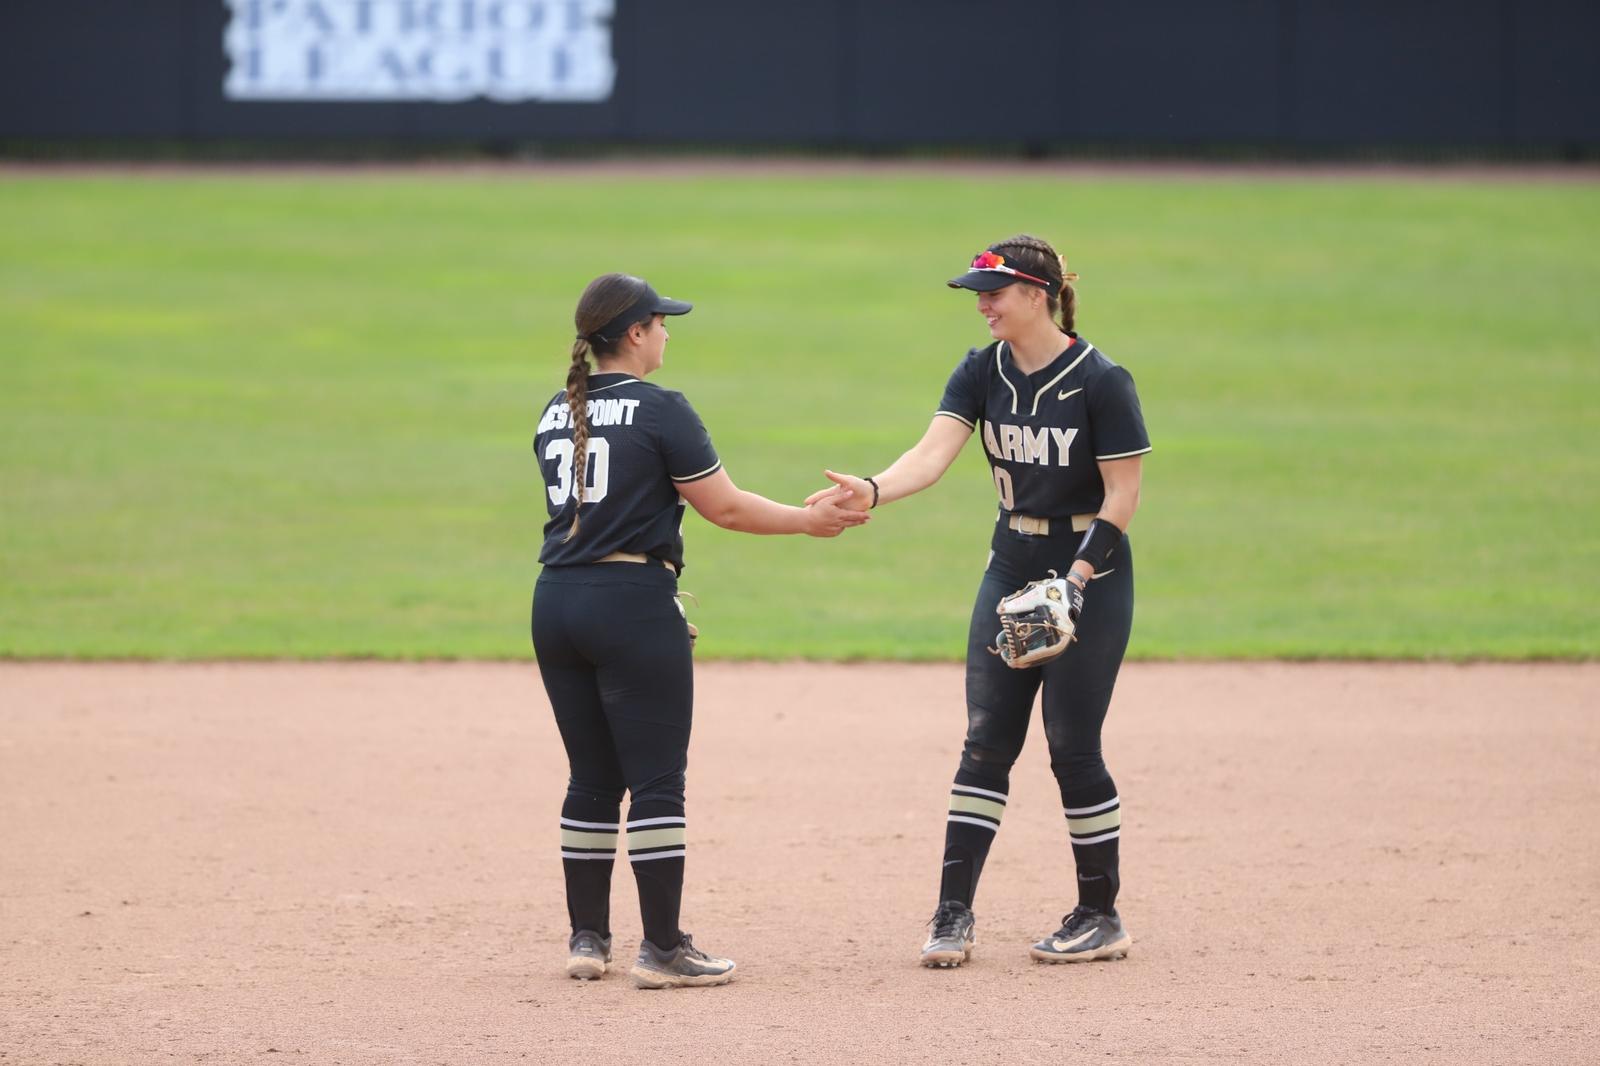 Army Softball Faces Lehigh in Patriot League Matches, Julia Farris and Sophie Smith Shine